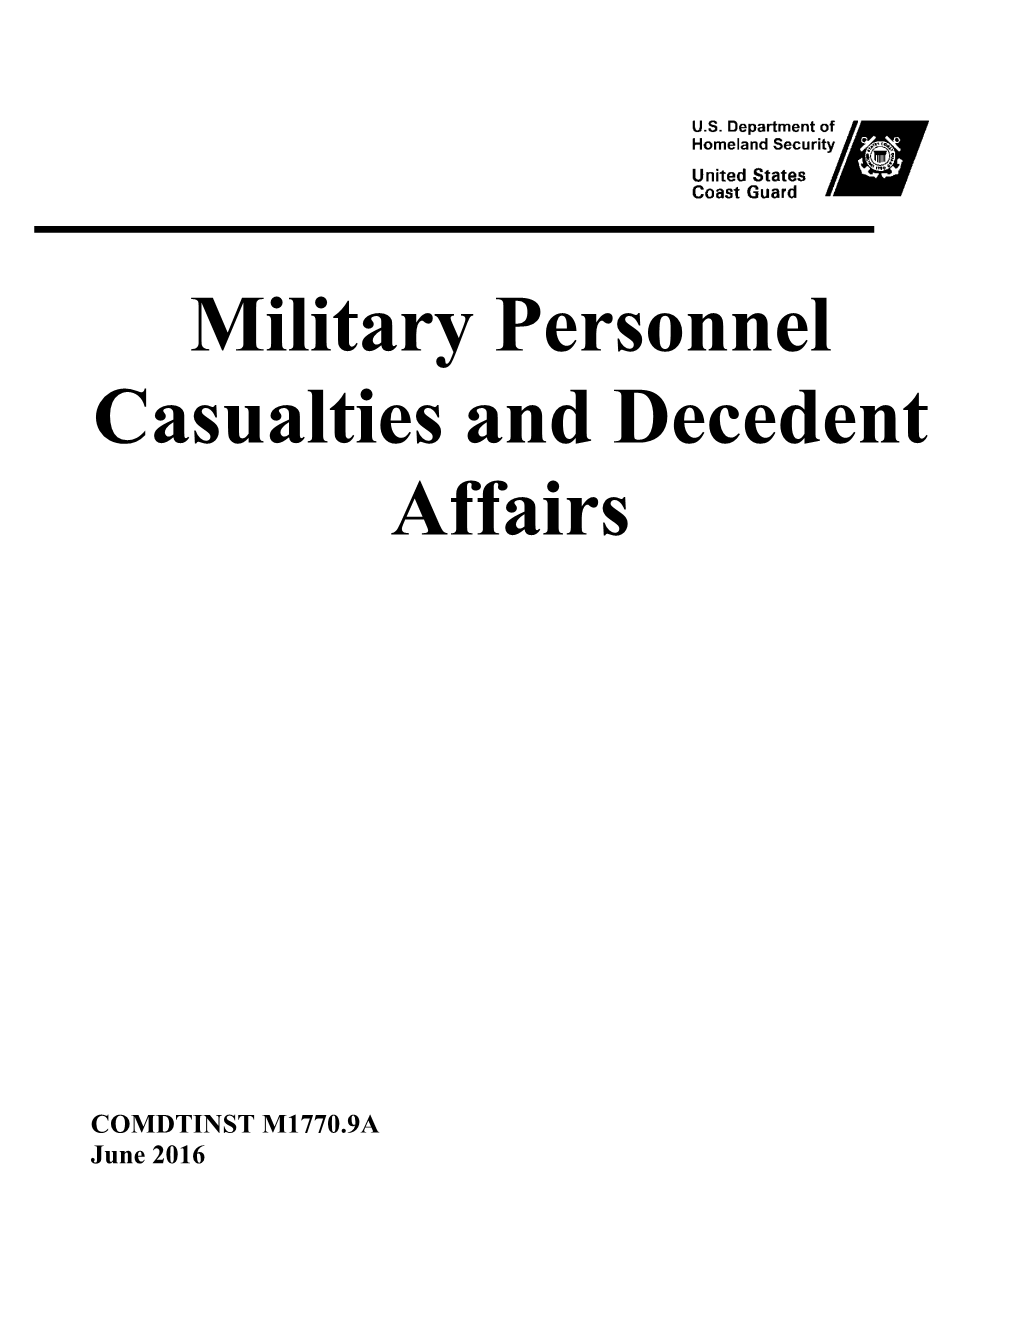 Military Personnel Casualties and Decedent Affairs